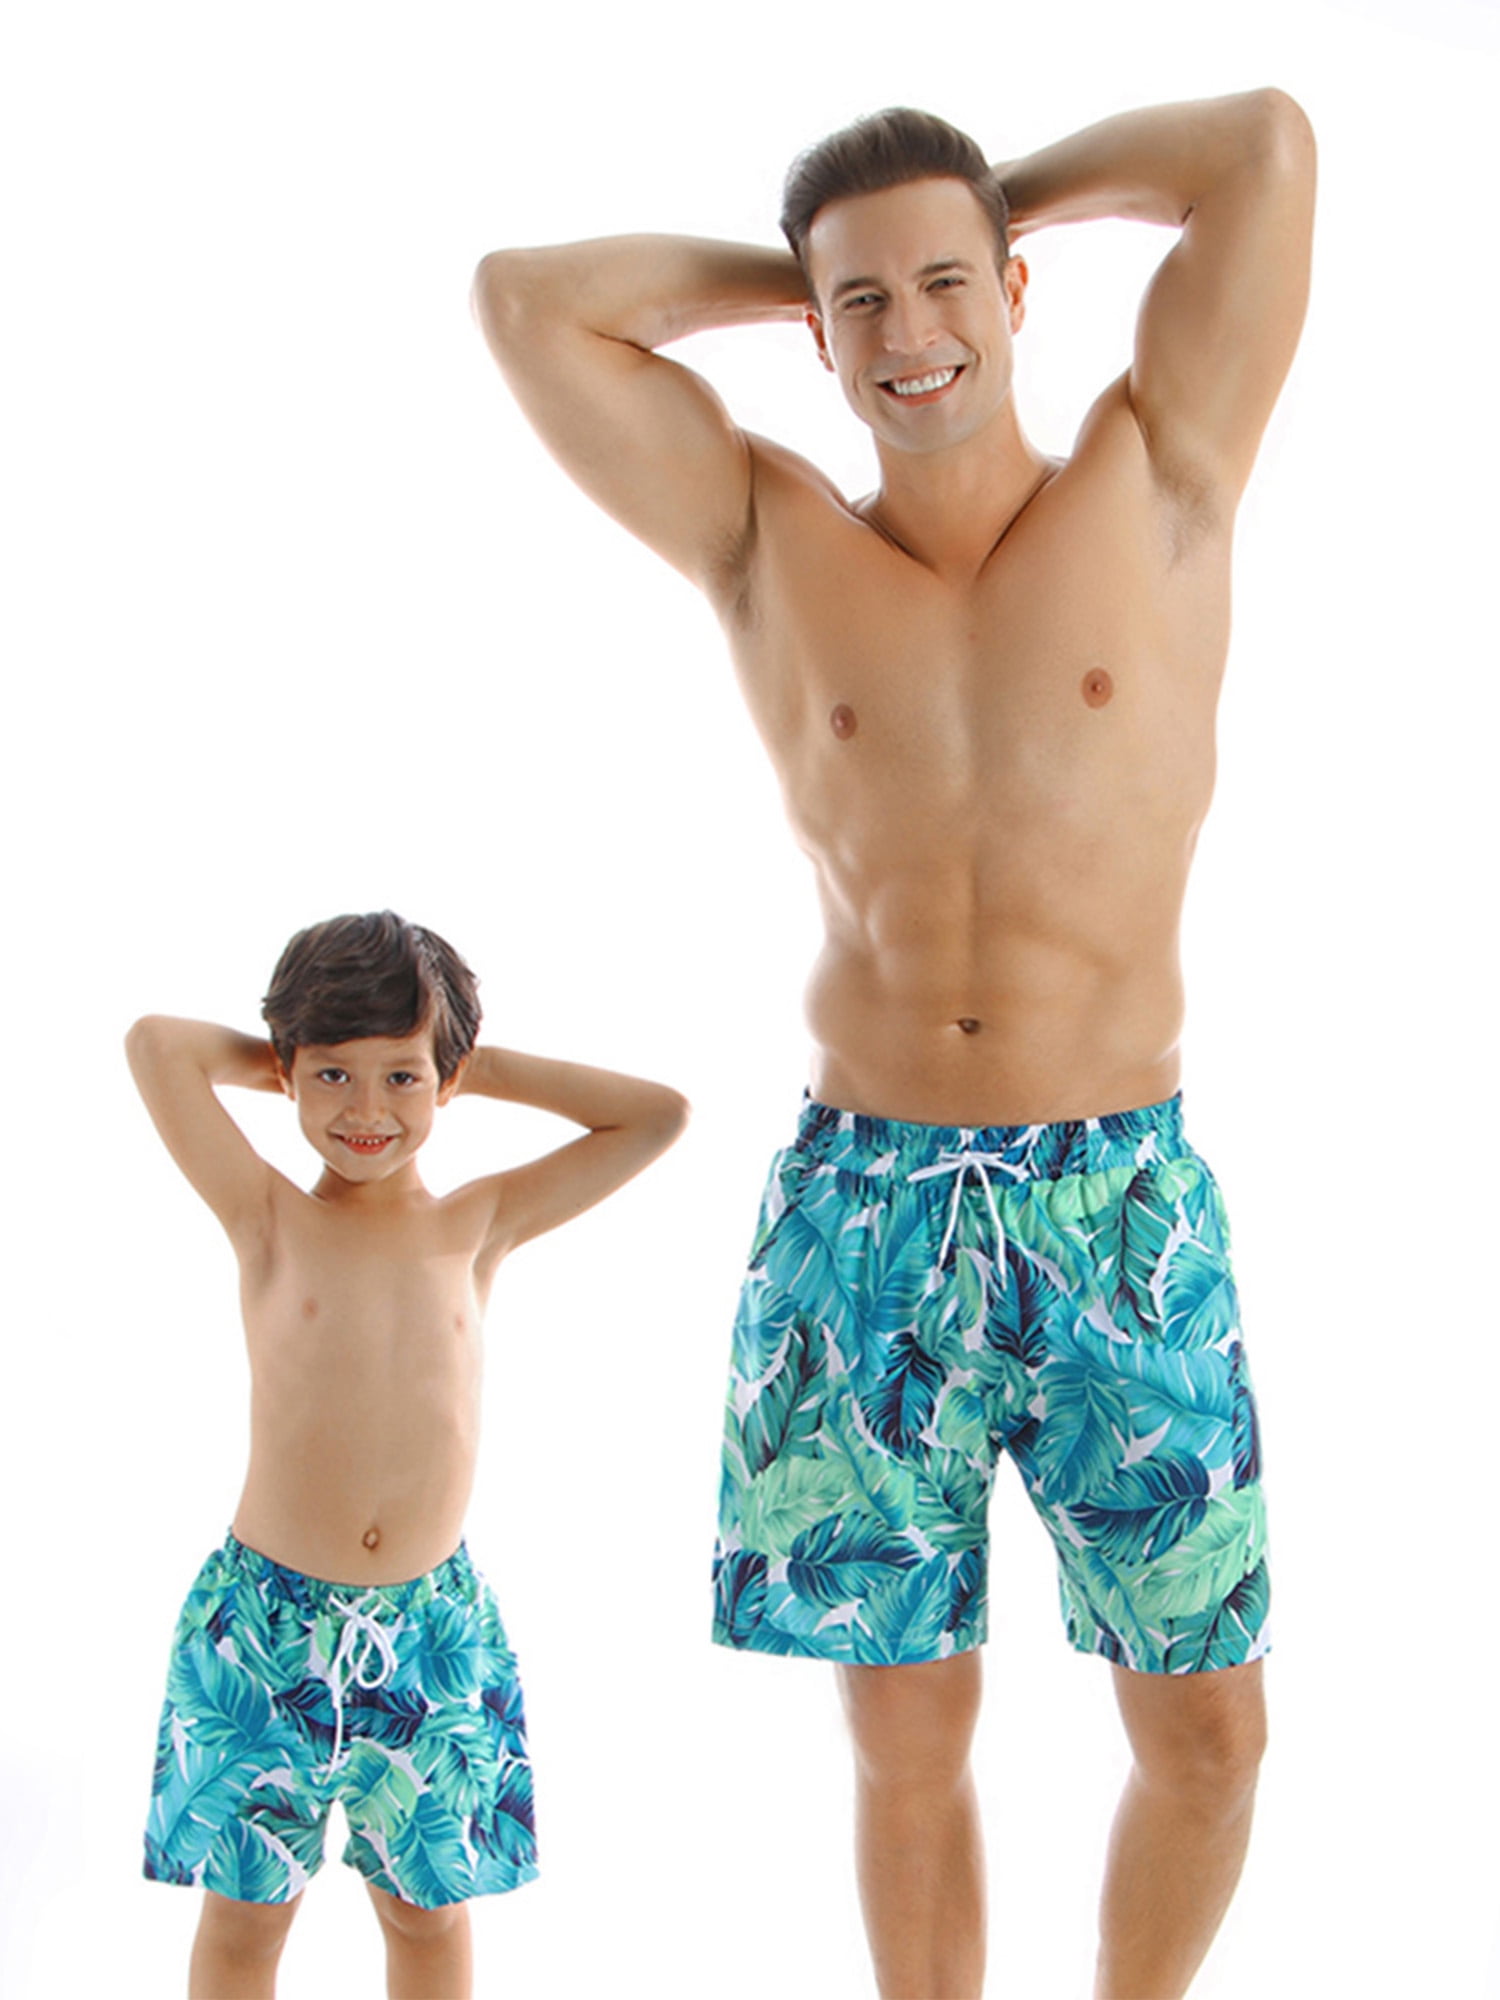 Matching Swimsuit Matching Dad And Son Swimsuit Matching Father And Son Swimwear Green leaf shorts Men Trunks